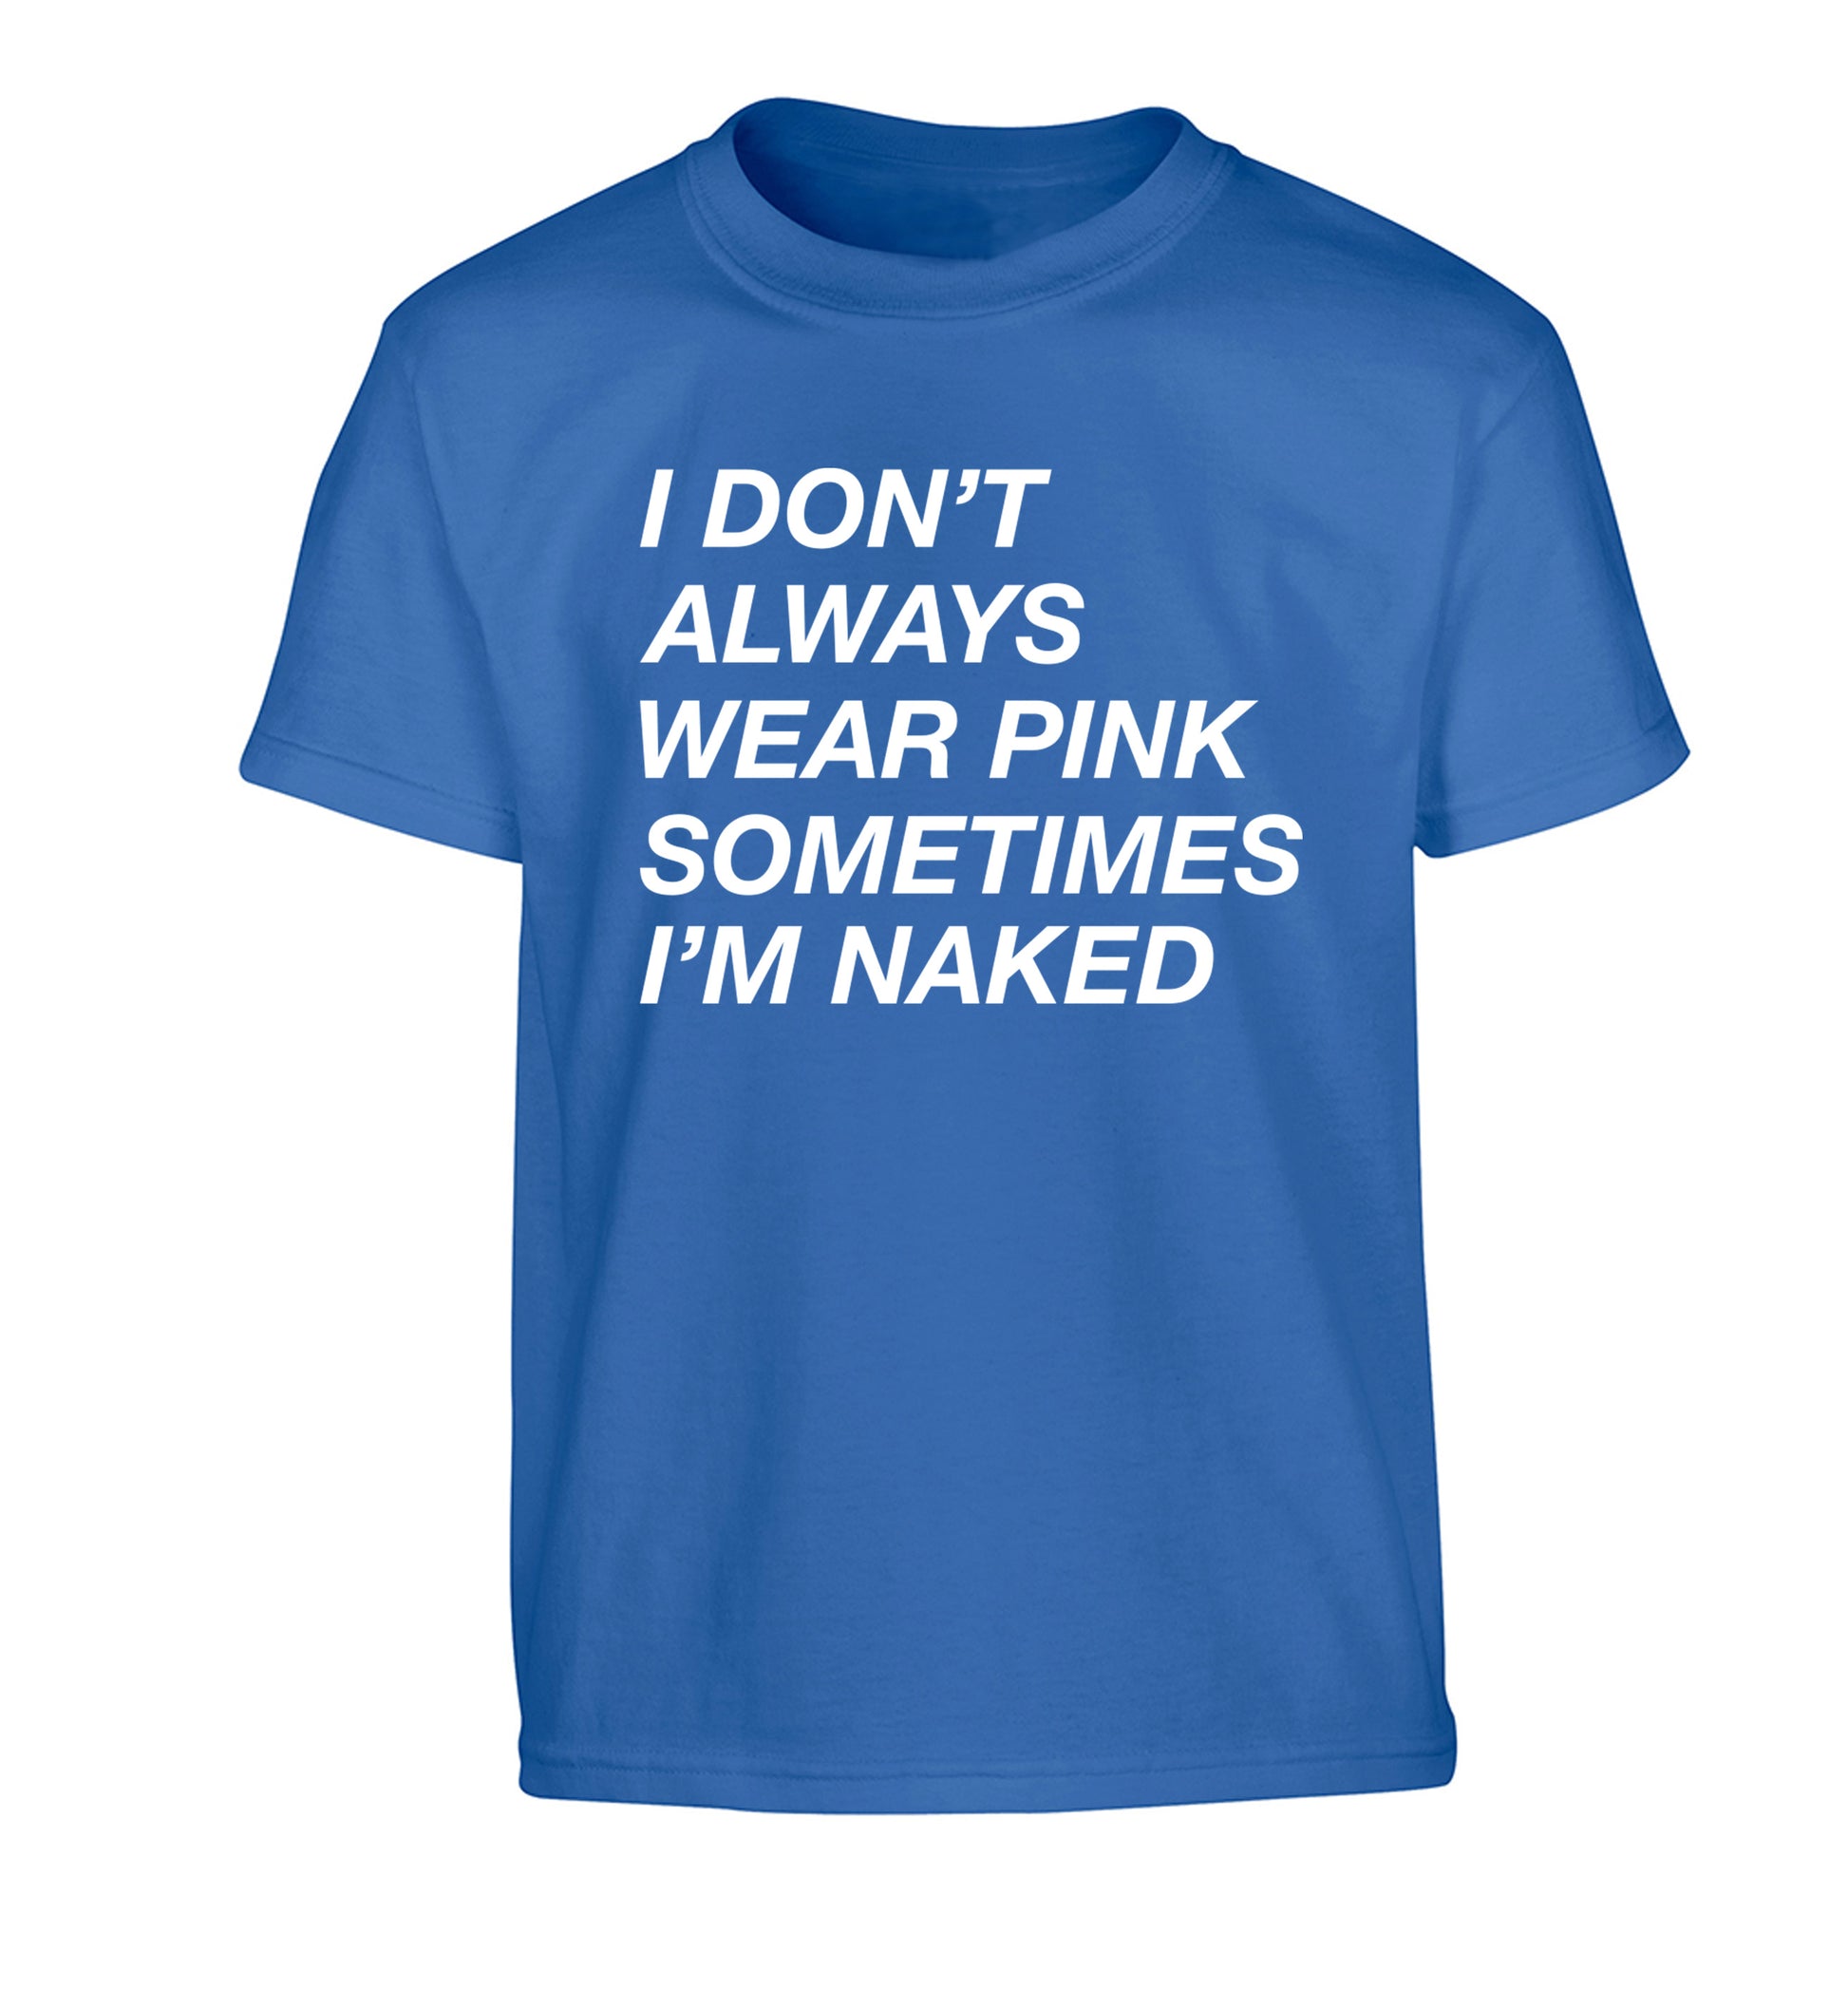 I don't always wear pink sometimes I'm naked Children's blue Tshirt 12-13 Years